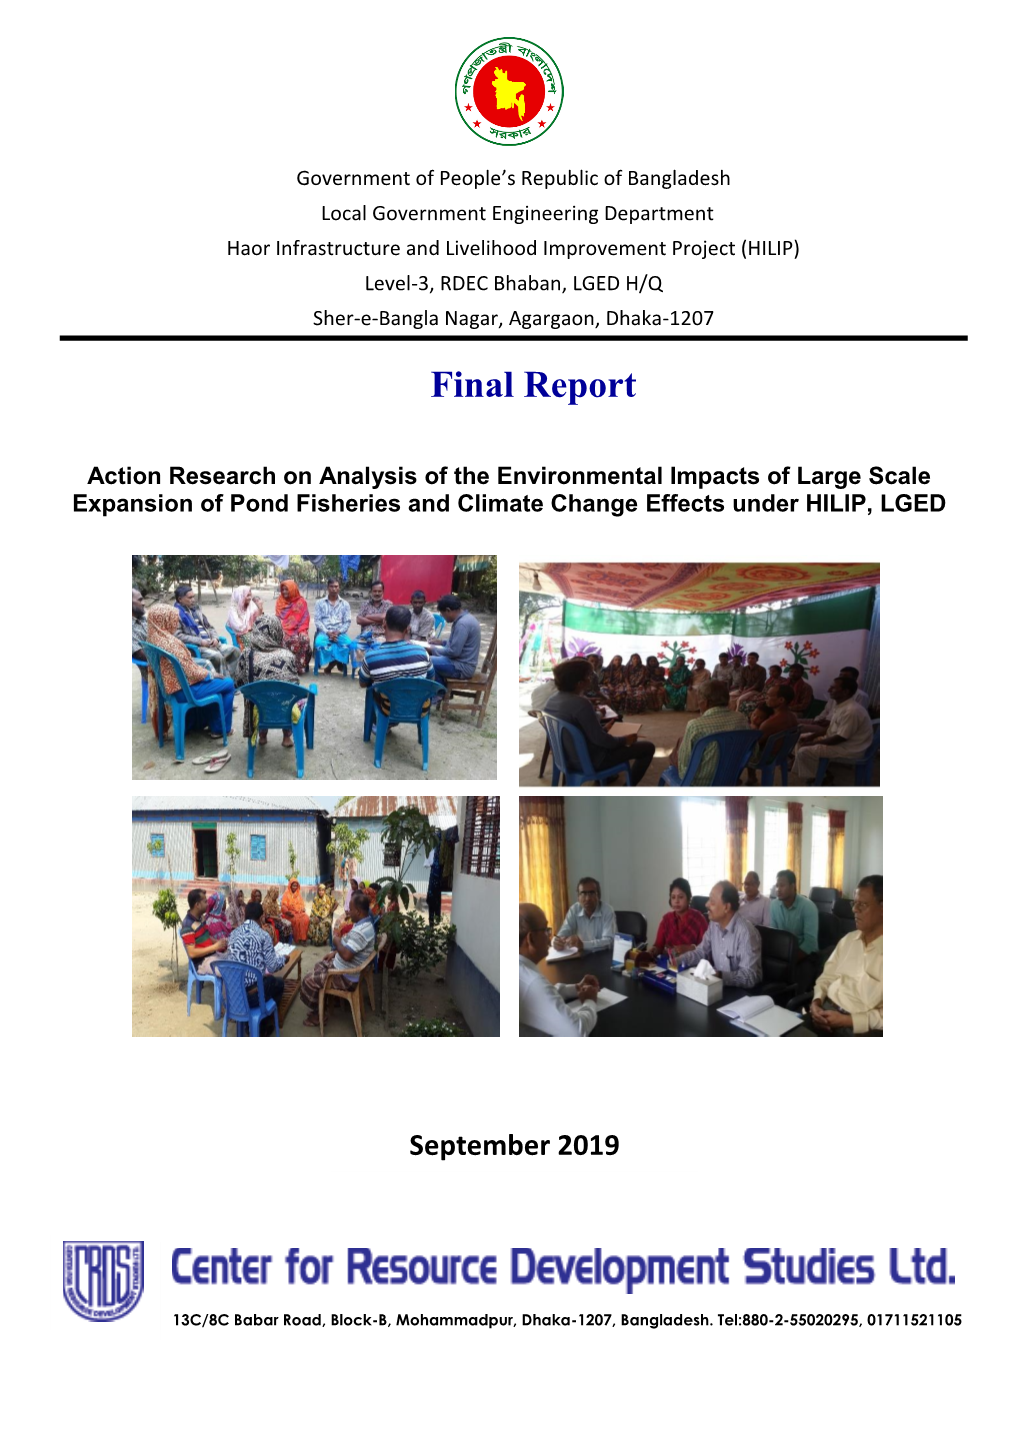 Final Report Action Research Pond Fisheries.Pdf